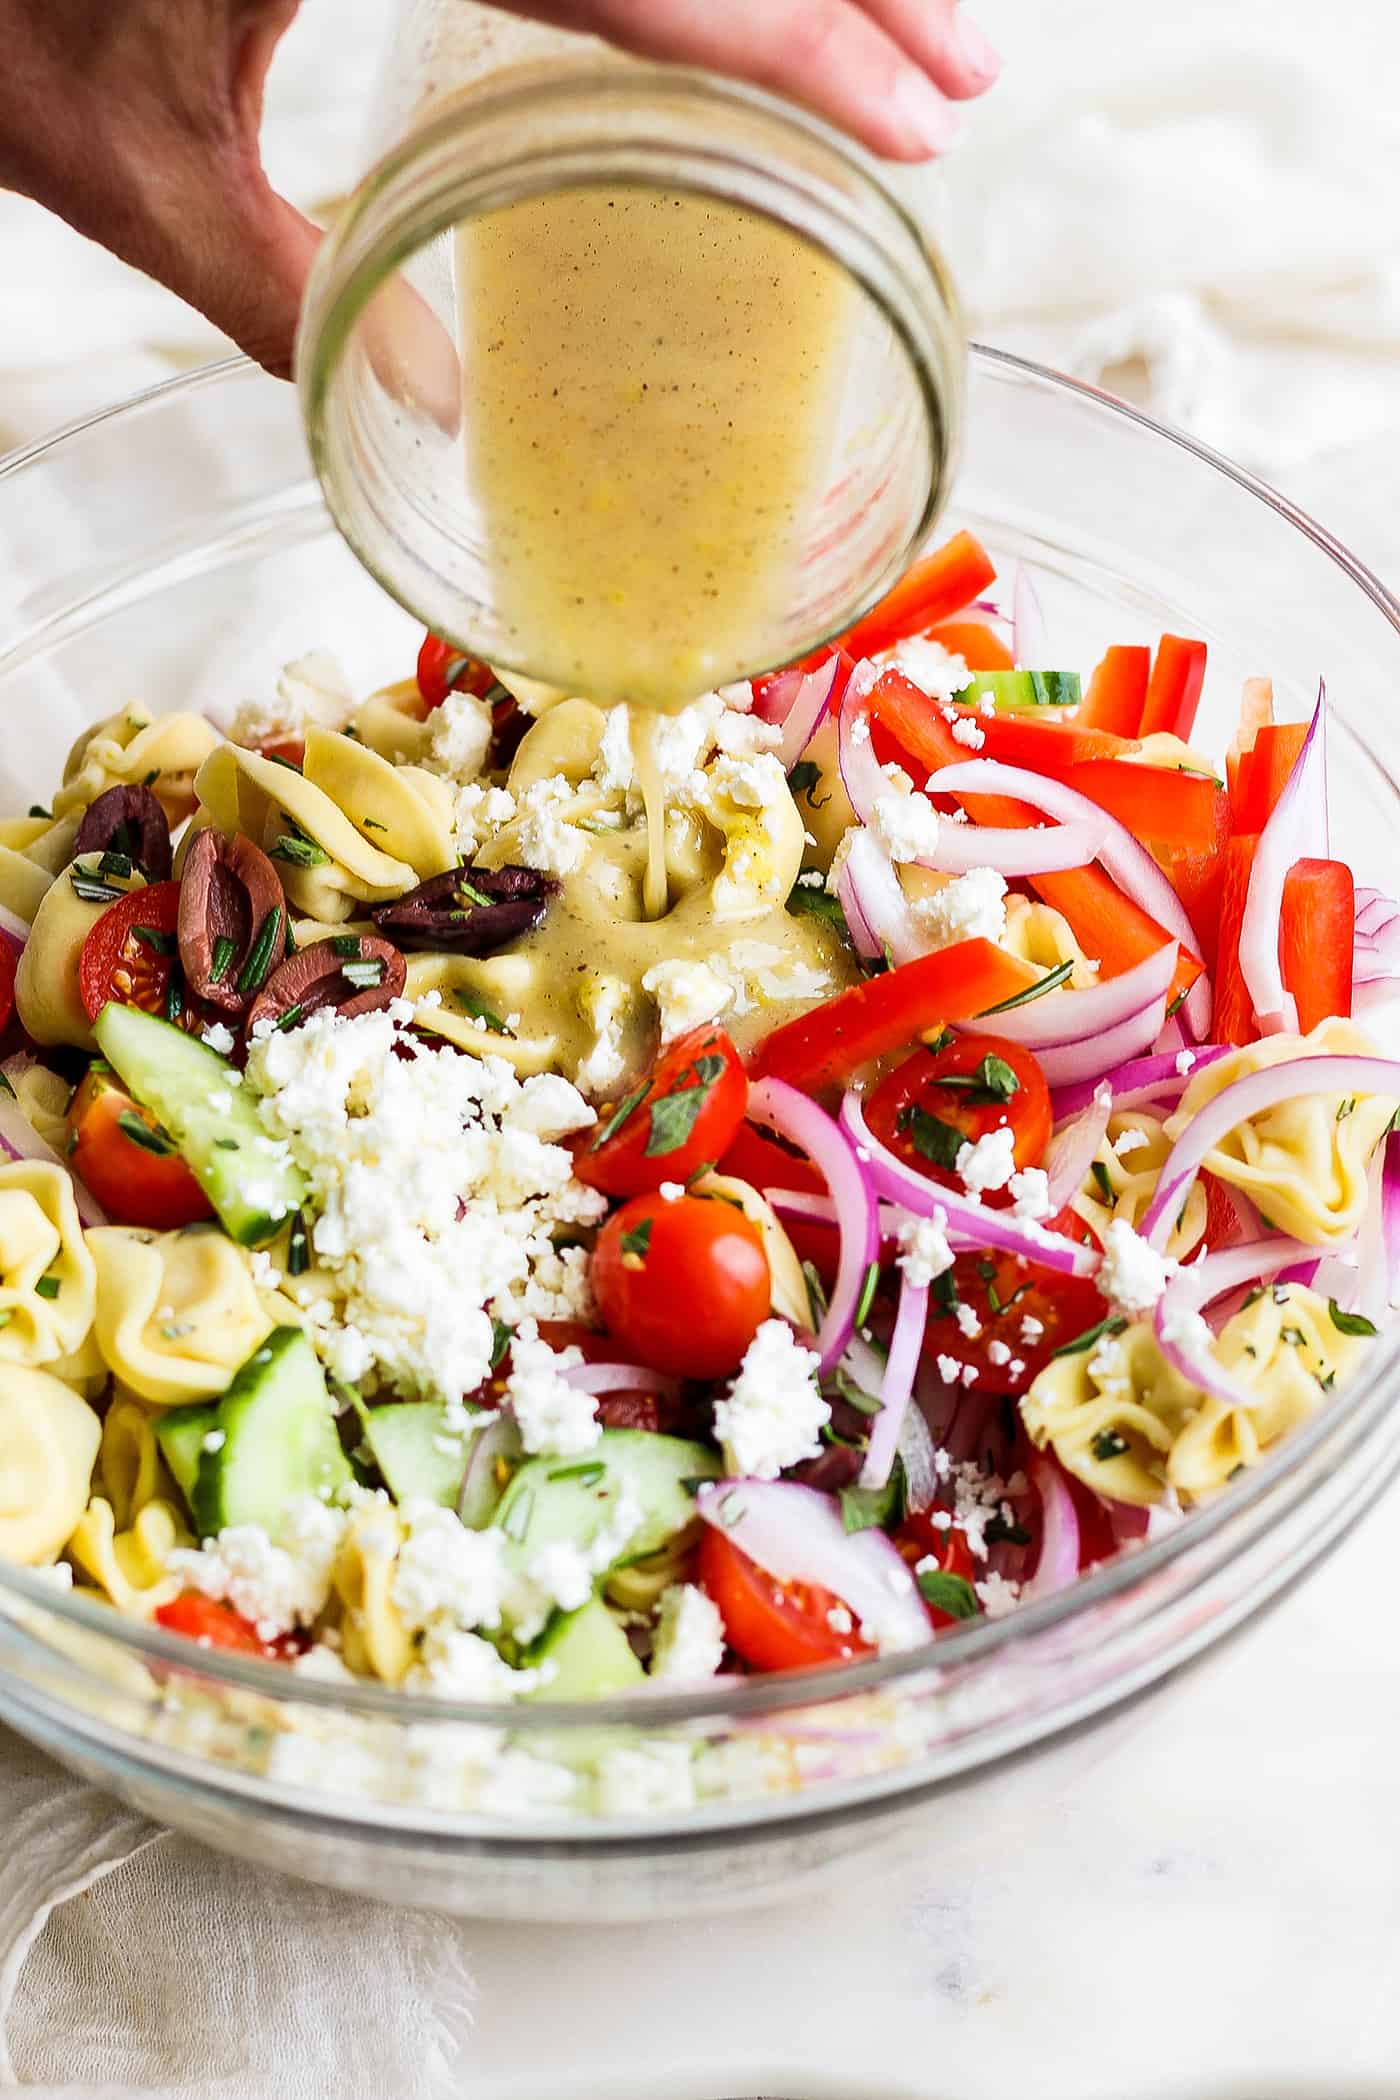 A hand pours dressing onto a bowl of Greek tortellini salad.